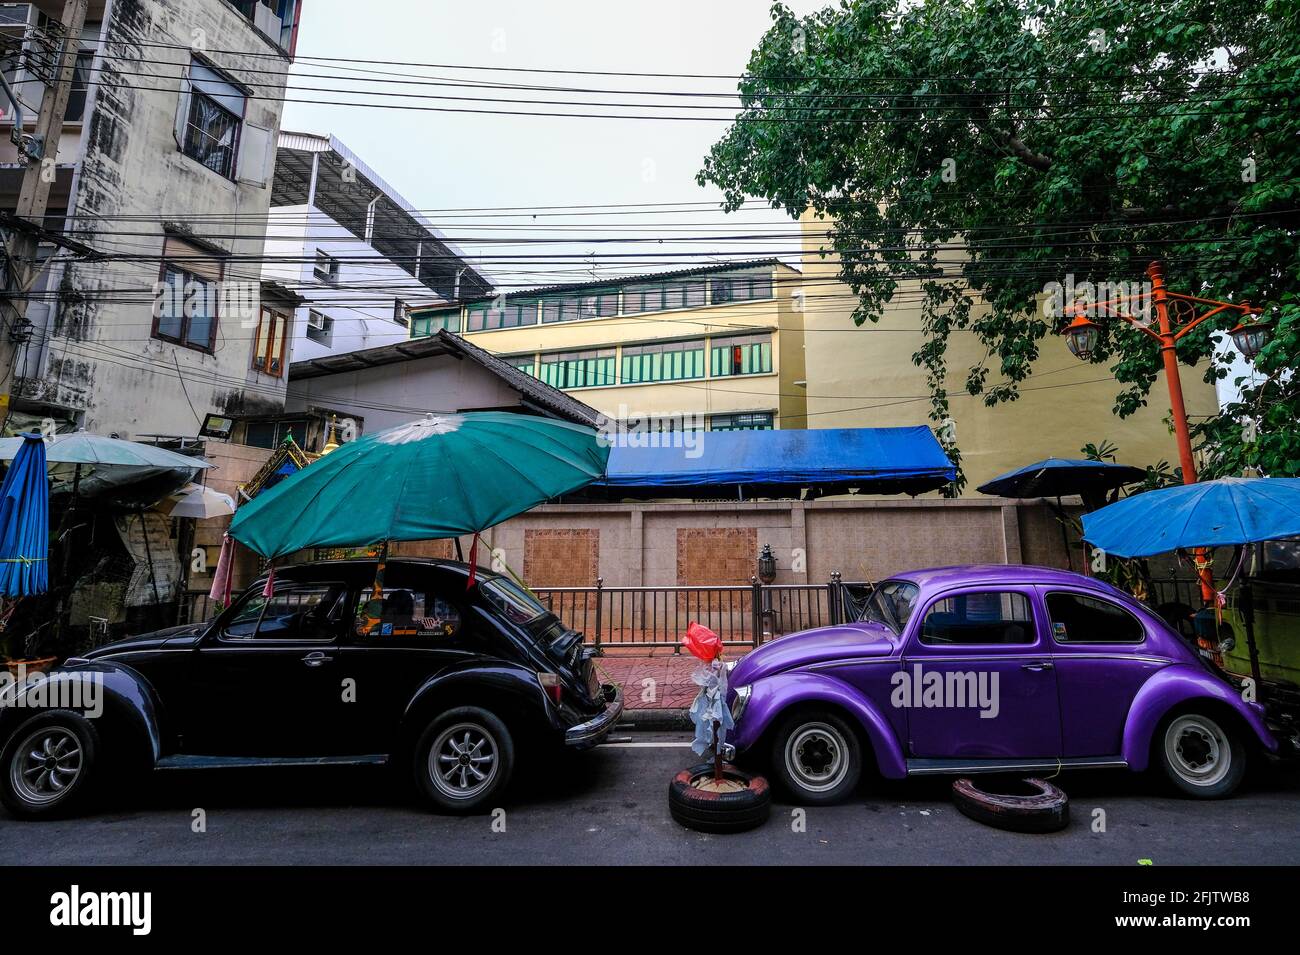 Two old VW Beetle cars are parked in a street in the Chinatown area of Bangkok, Thailand Stock Photo